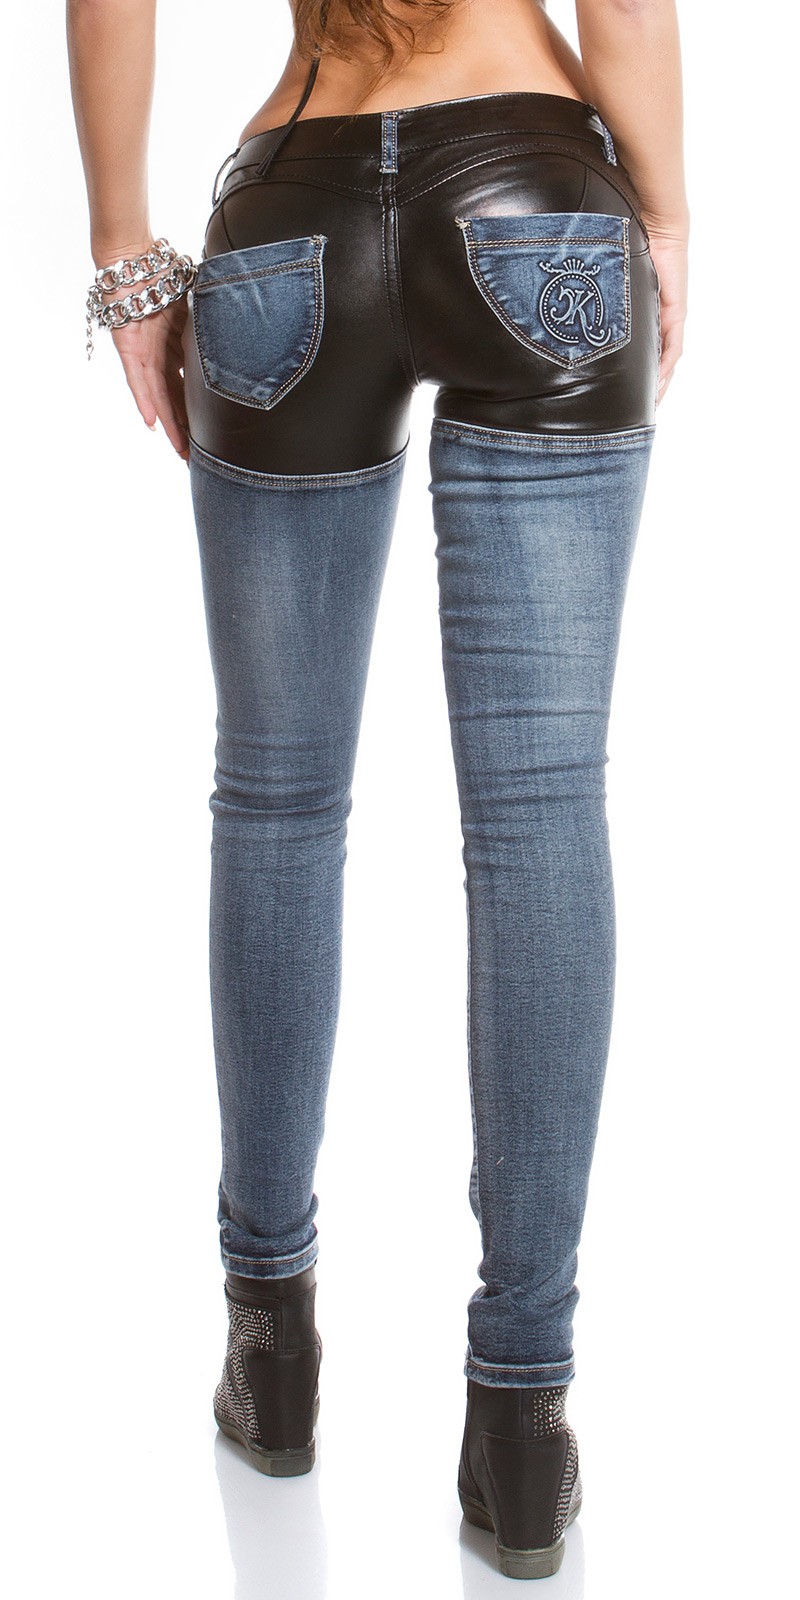 ooKouCla skinny jeans with leather look Color JEANSBLUE Size 38 0000K600 212 JEANSBLAU 6